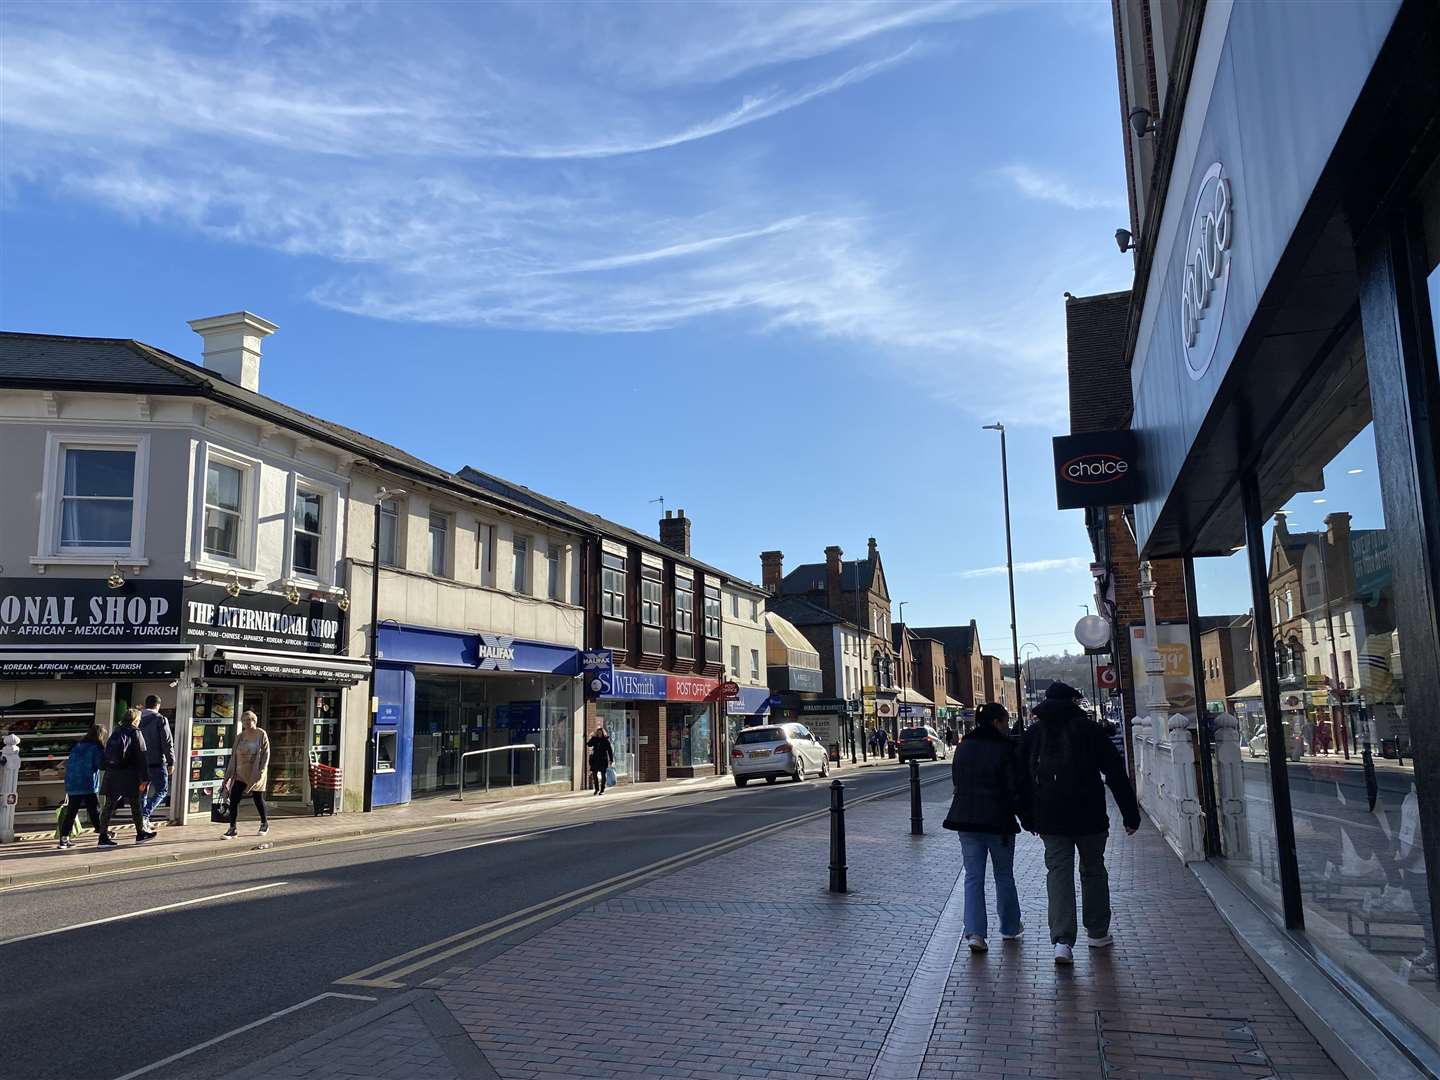 The council is aiming for a cleaner Tonbridge High Street